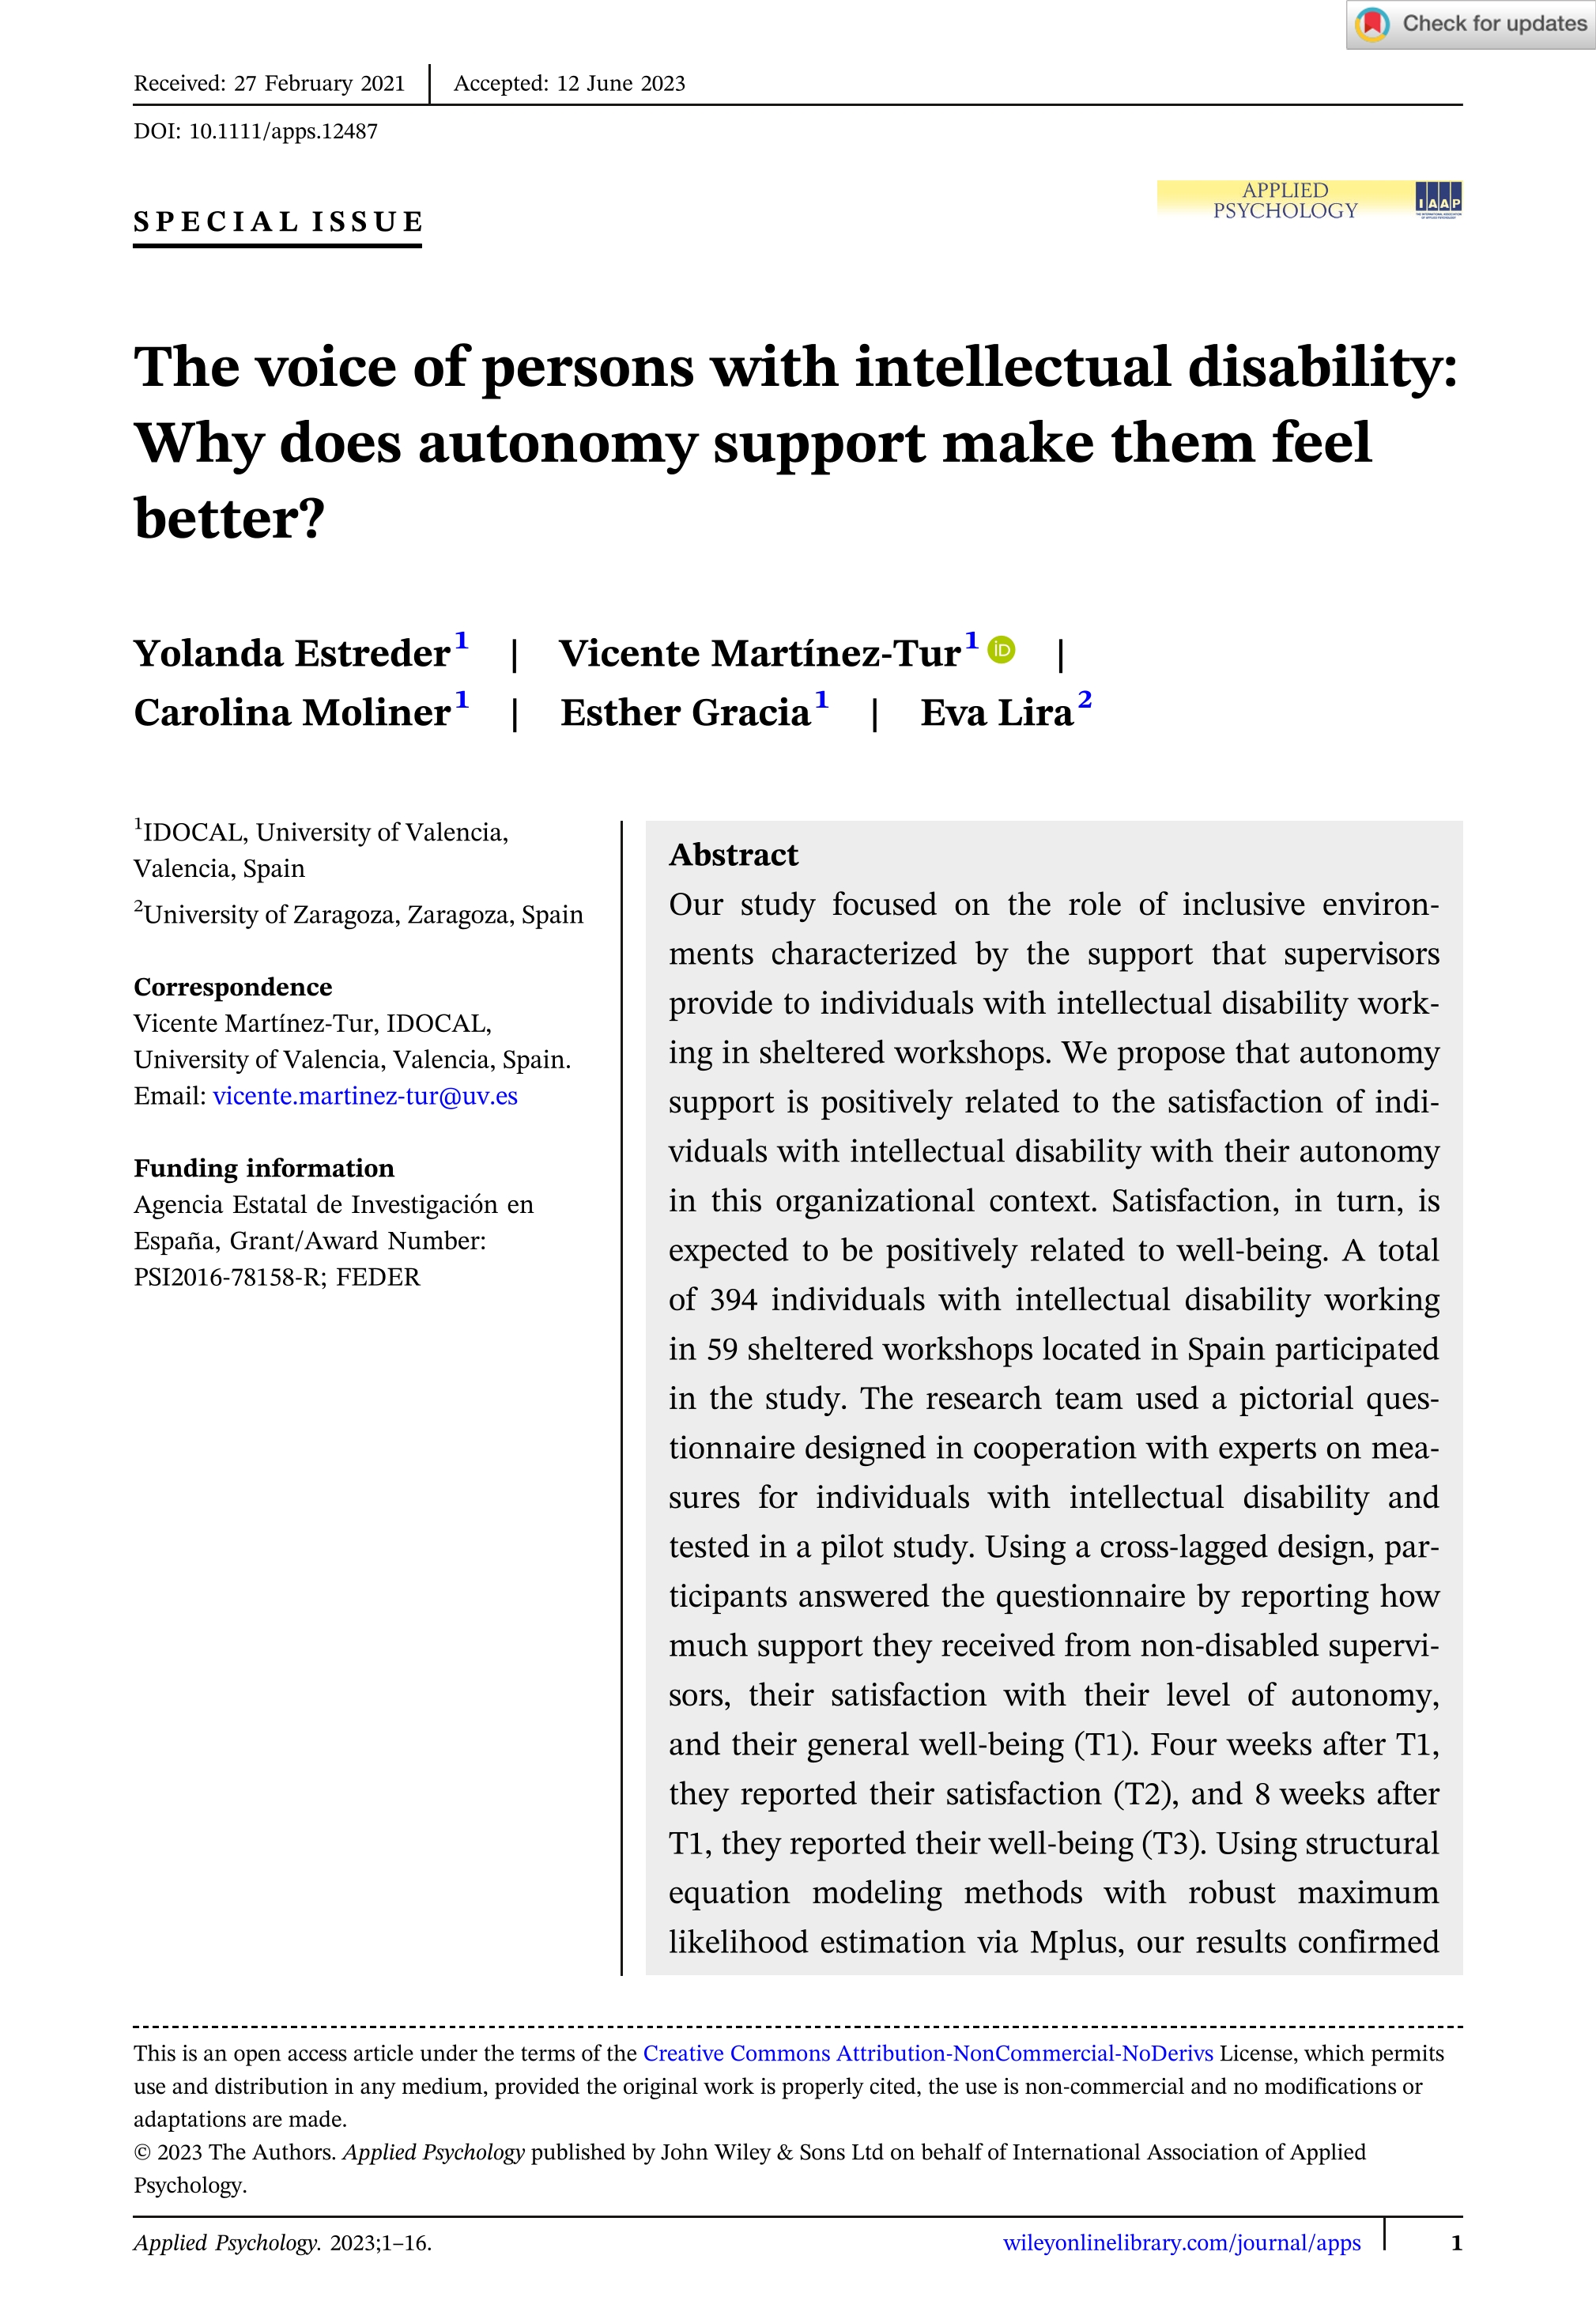 The voice of persons with intellectual disability: Why does autonomy support make them feel better?